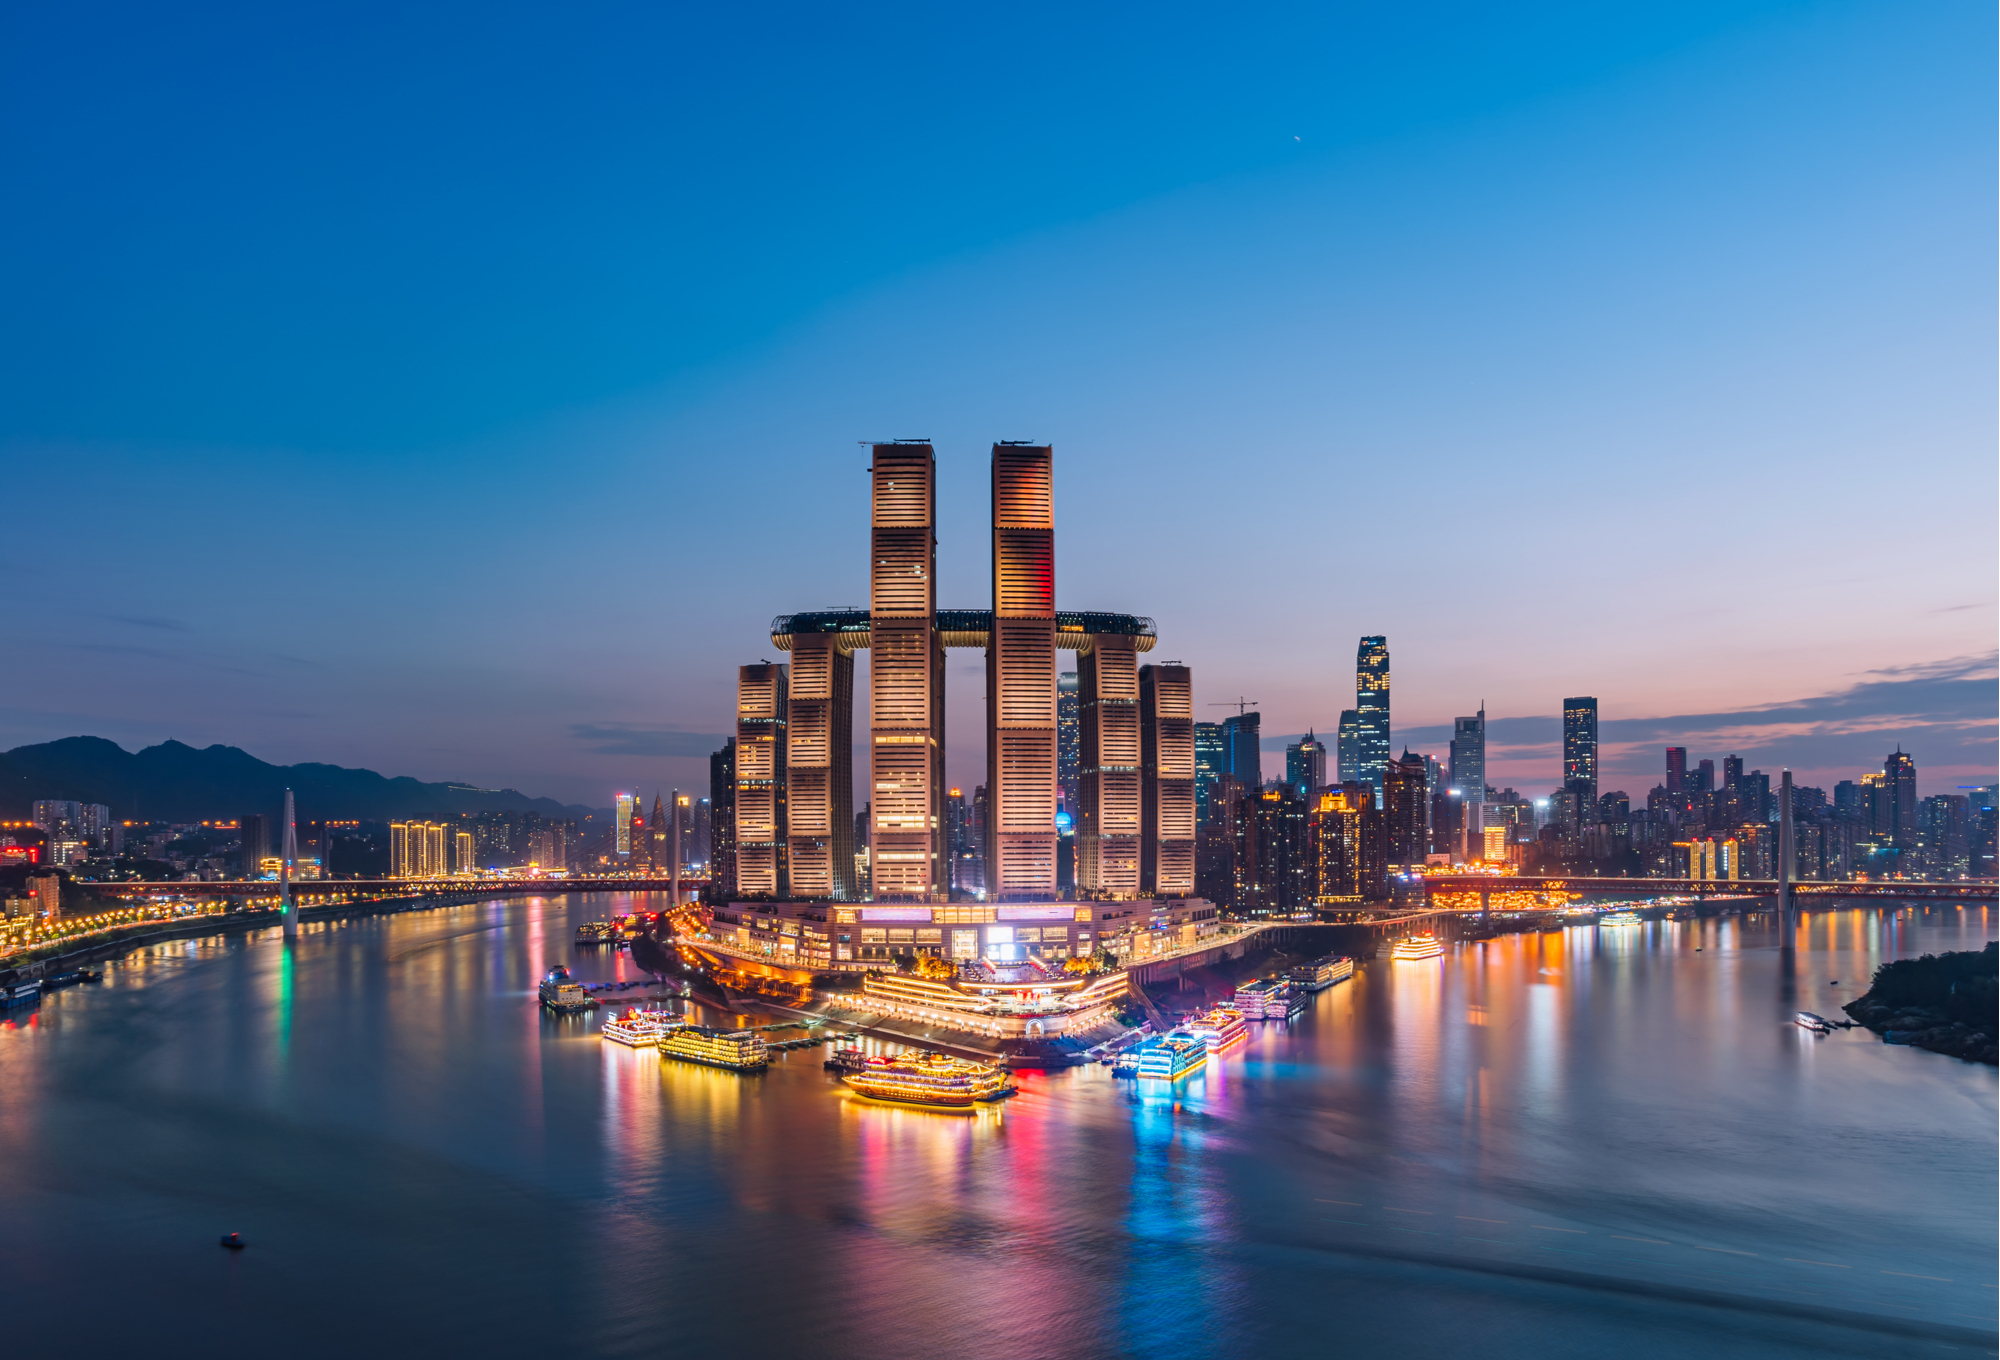 11 Photos To Inspire You to Visit Raffles City in Chongqing